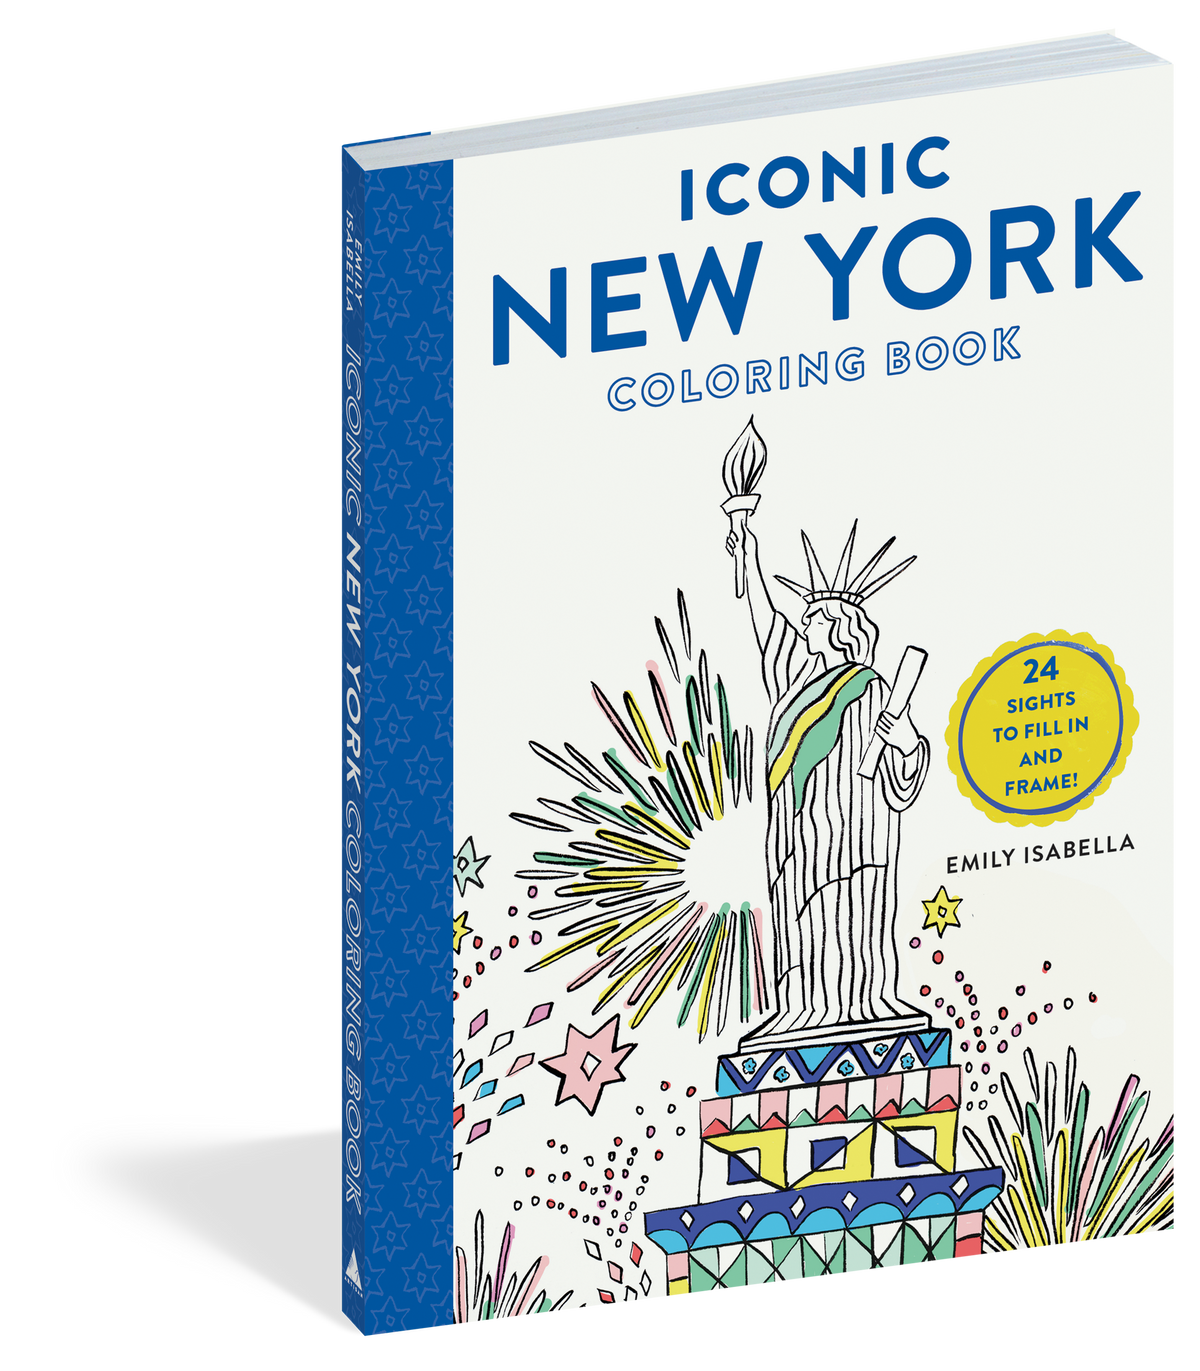 Iconic New York Coloring Book 24 Sights to Fill In and Frame